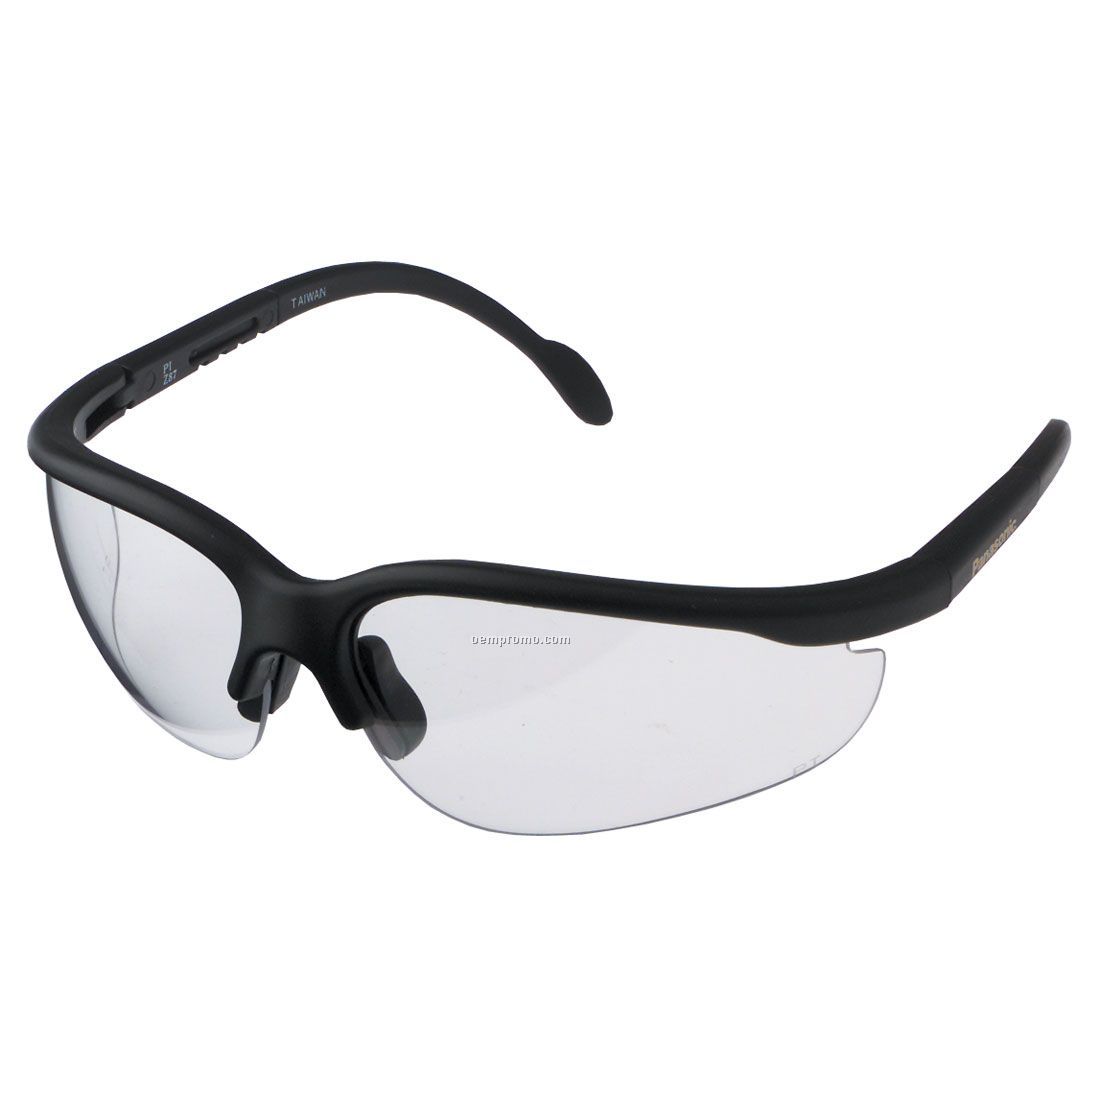 Armor Safety Glasses W/ Clear Or Gray Lens